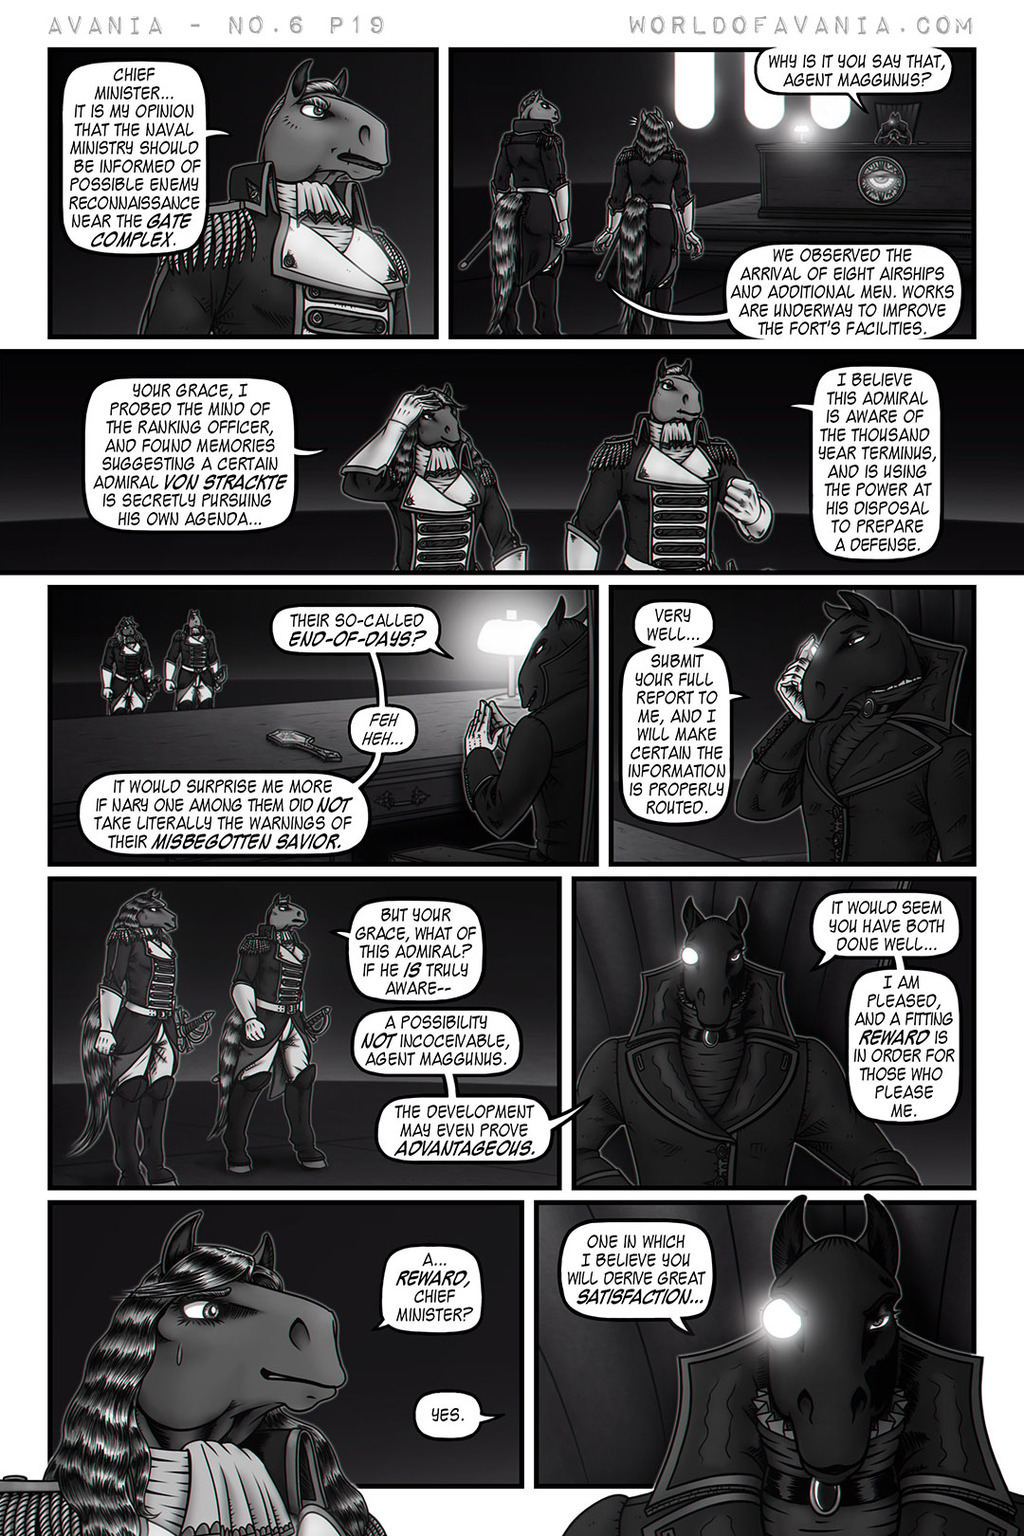 Avania Comic - Issue No.6, Page 19